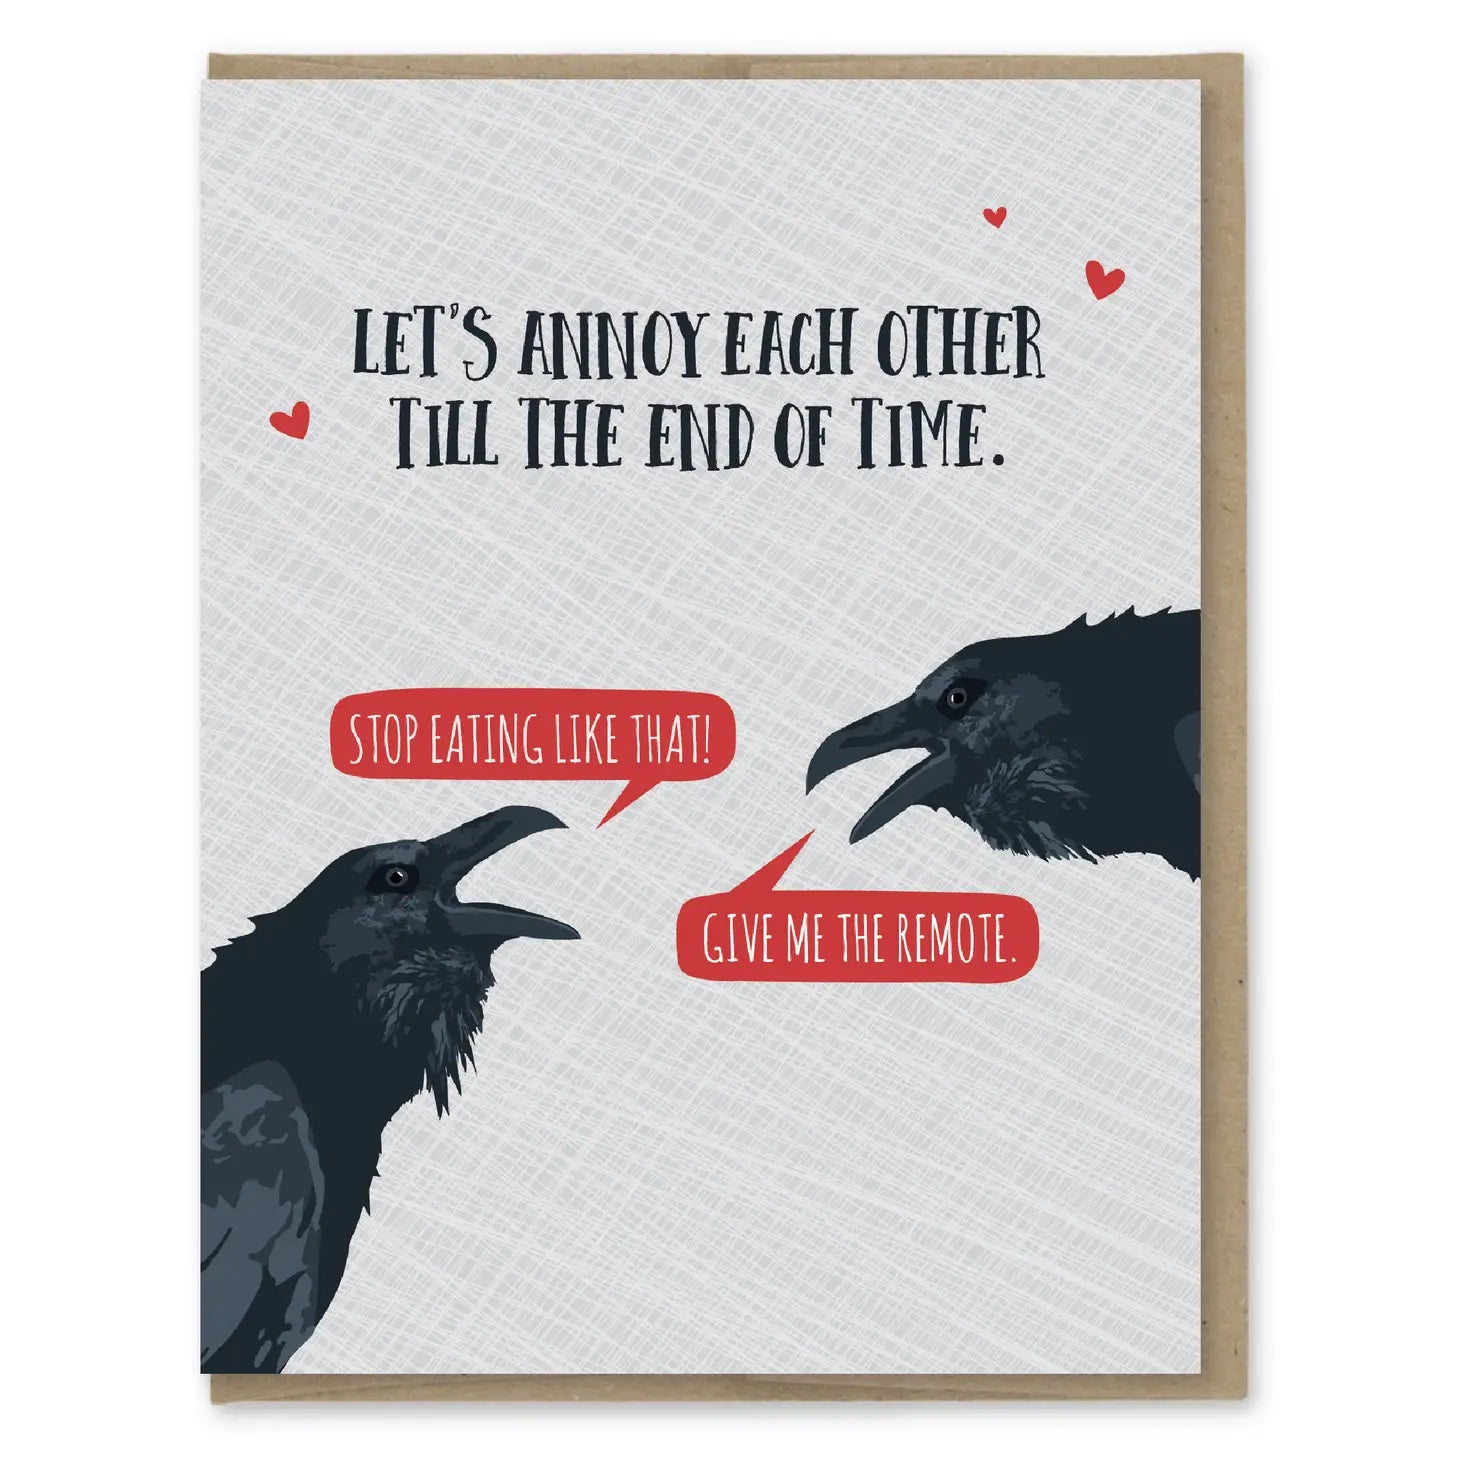 Annoy Each Other - Greeting Card